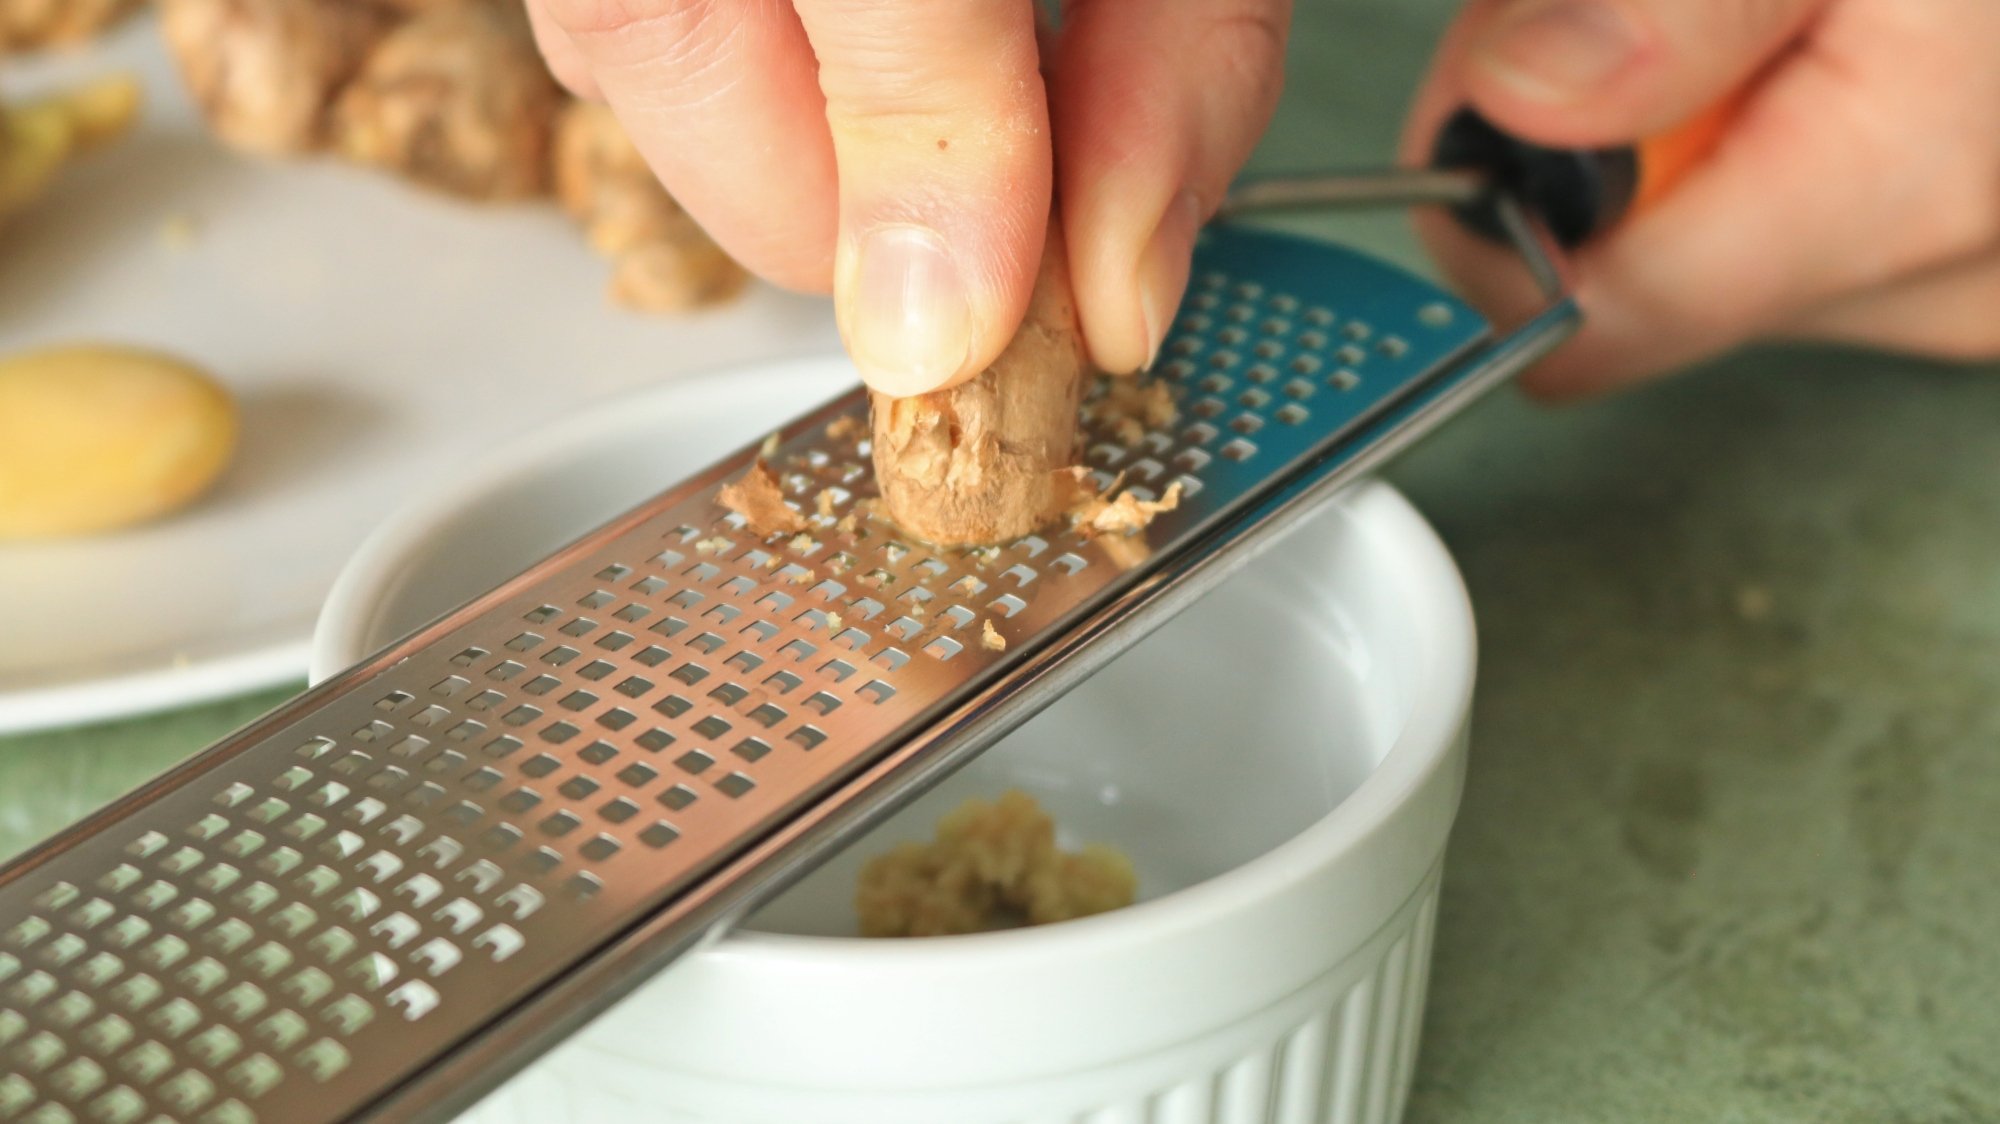 Hand grating ginger root on a microplane.